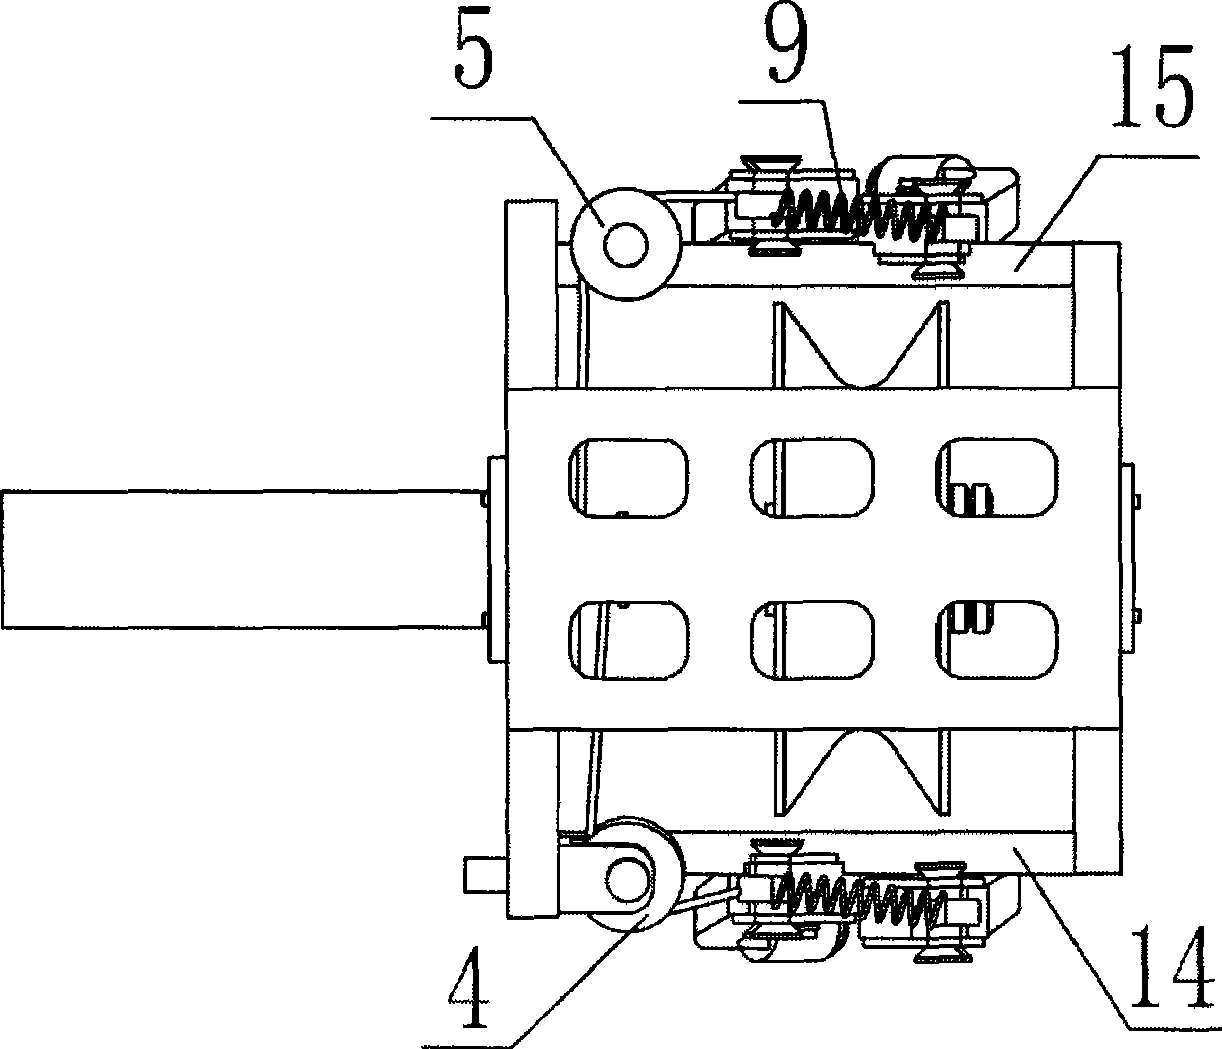 Gripper mechanism with fault release function for walking of patrolling robot